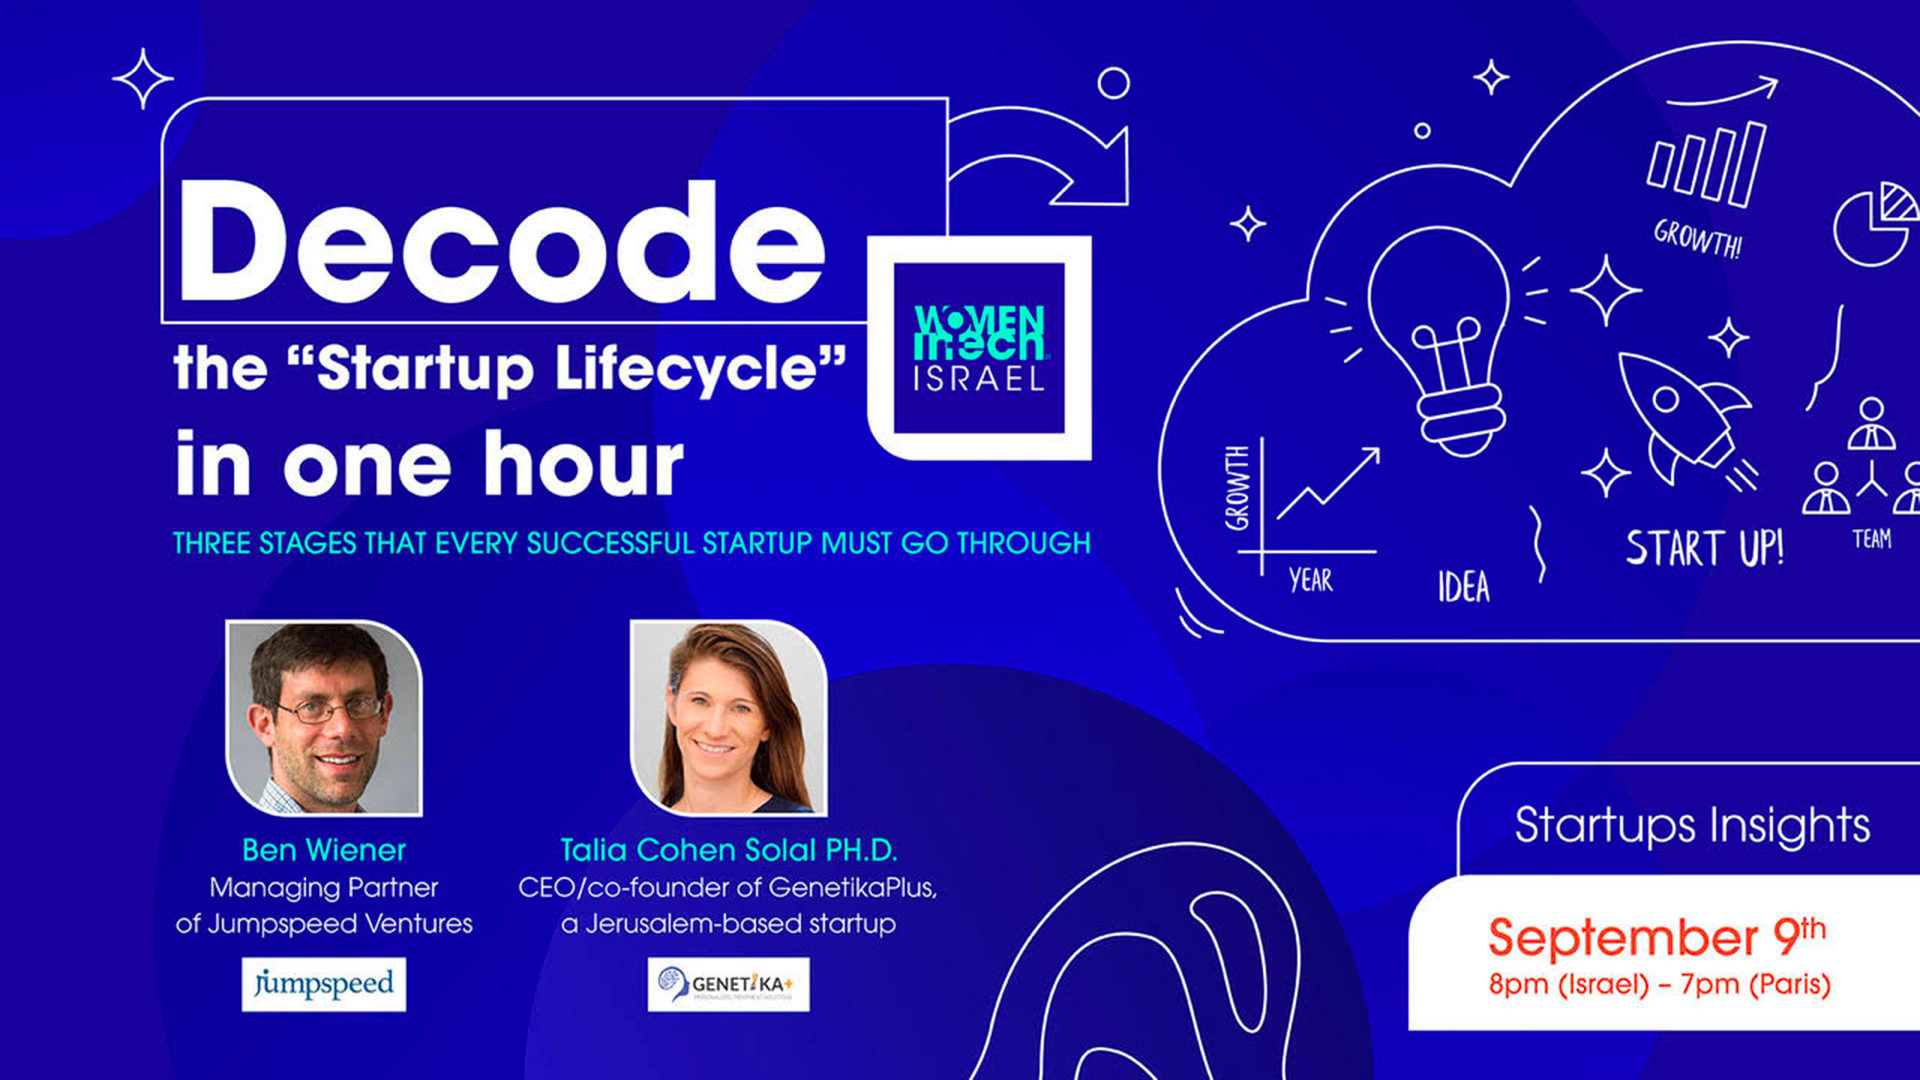 Decode the “Startup Lifecycle” in one hour.